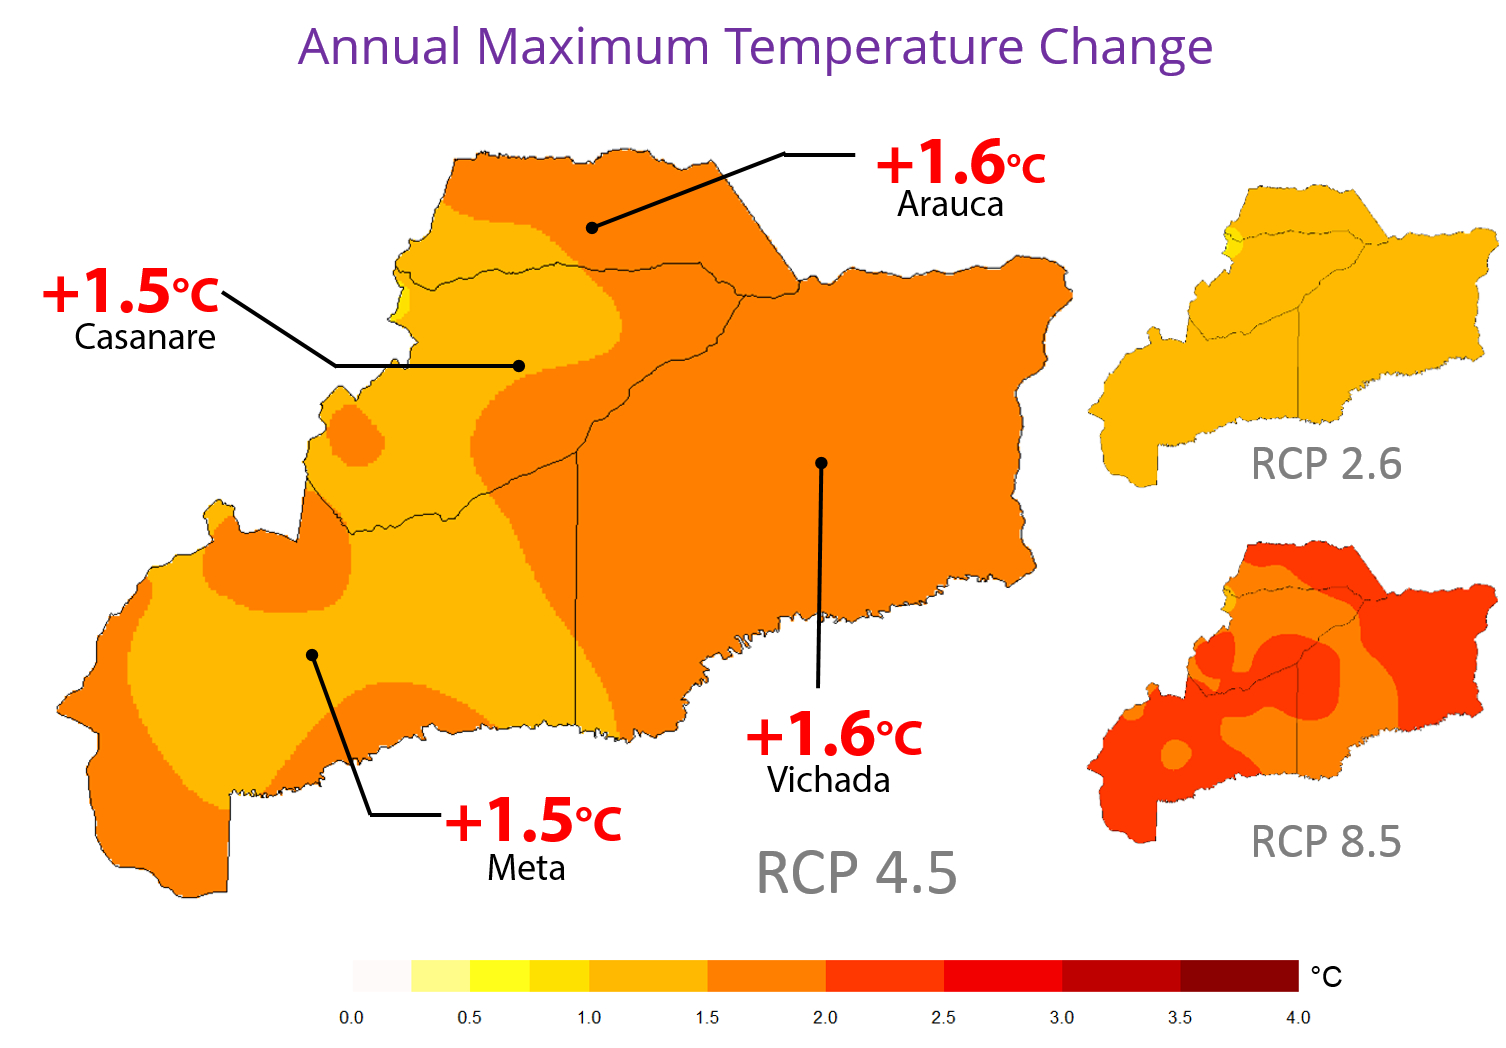 Projected changes in annual maximum temperature on Colombia’s Eastern Plains by 2040, for 3 emission scenarios: RCP 2.6 (optimistic), 4.5 (intermediate) y 8.5 (pessimist).